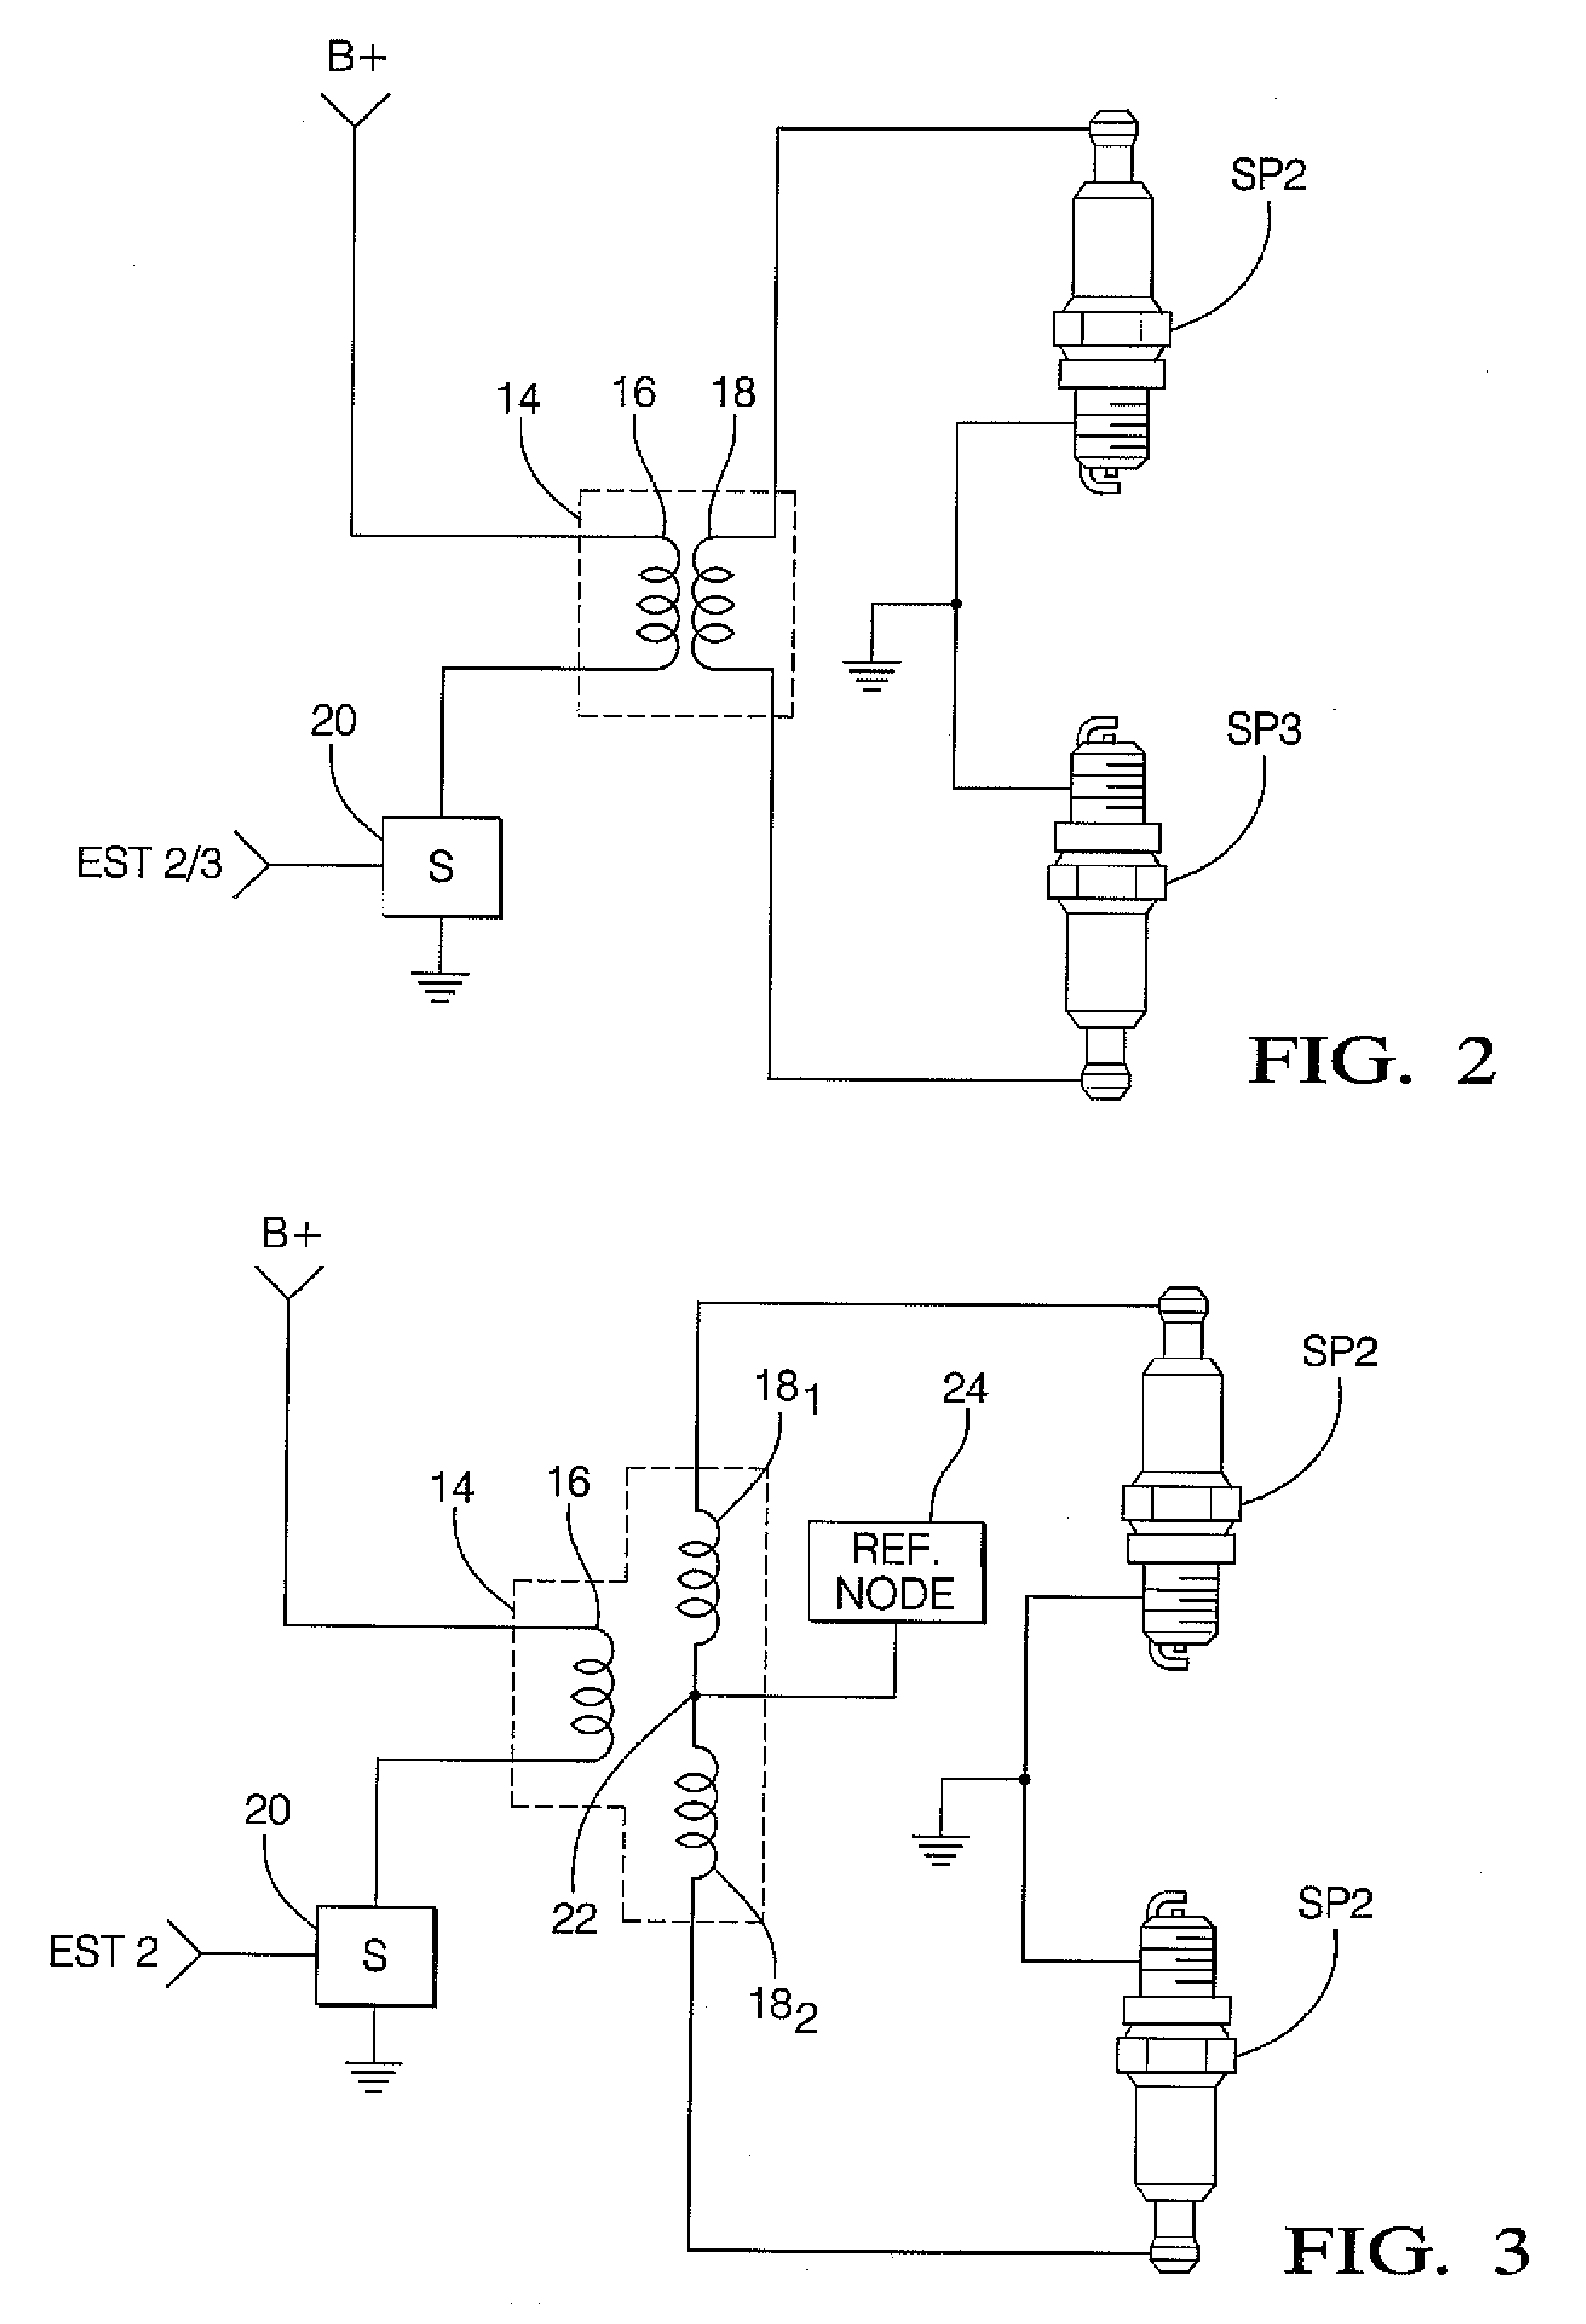 Twin spark ignition coil with provisions to balance load capacitance